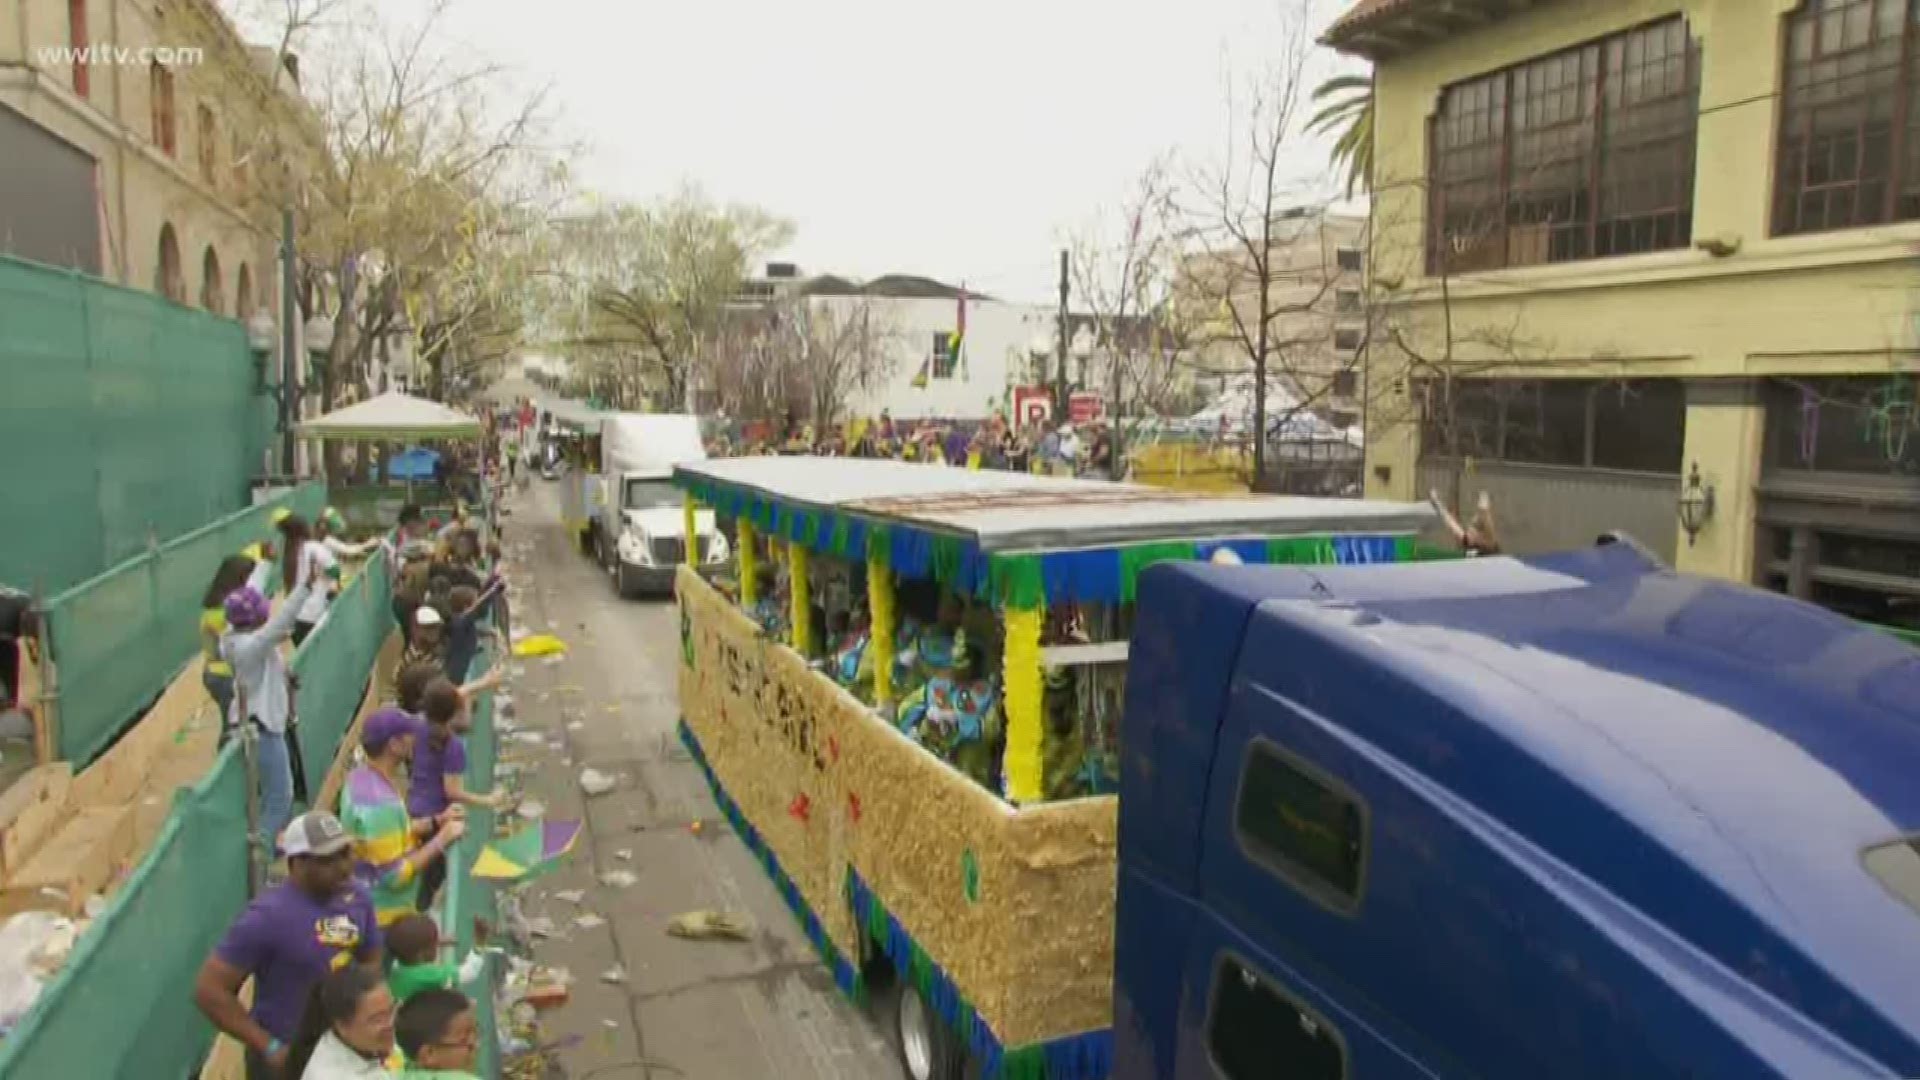 The krewe took to Facebook to say several trucks continued to throw beyond the disband area after being warned by the NOPD to stop.